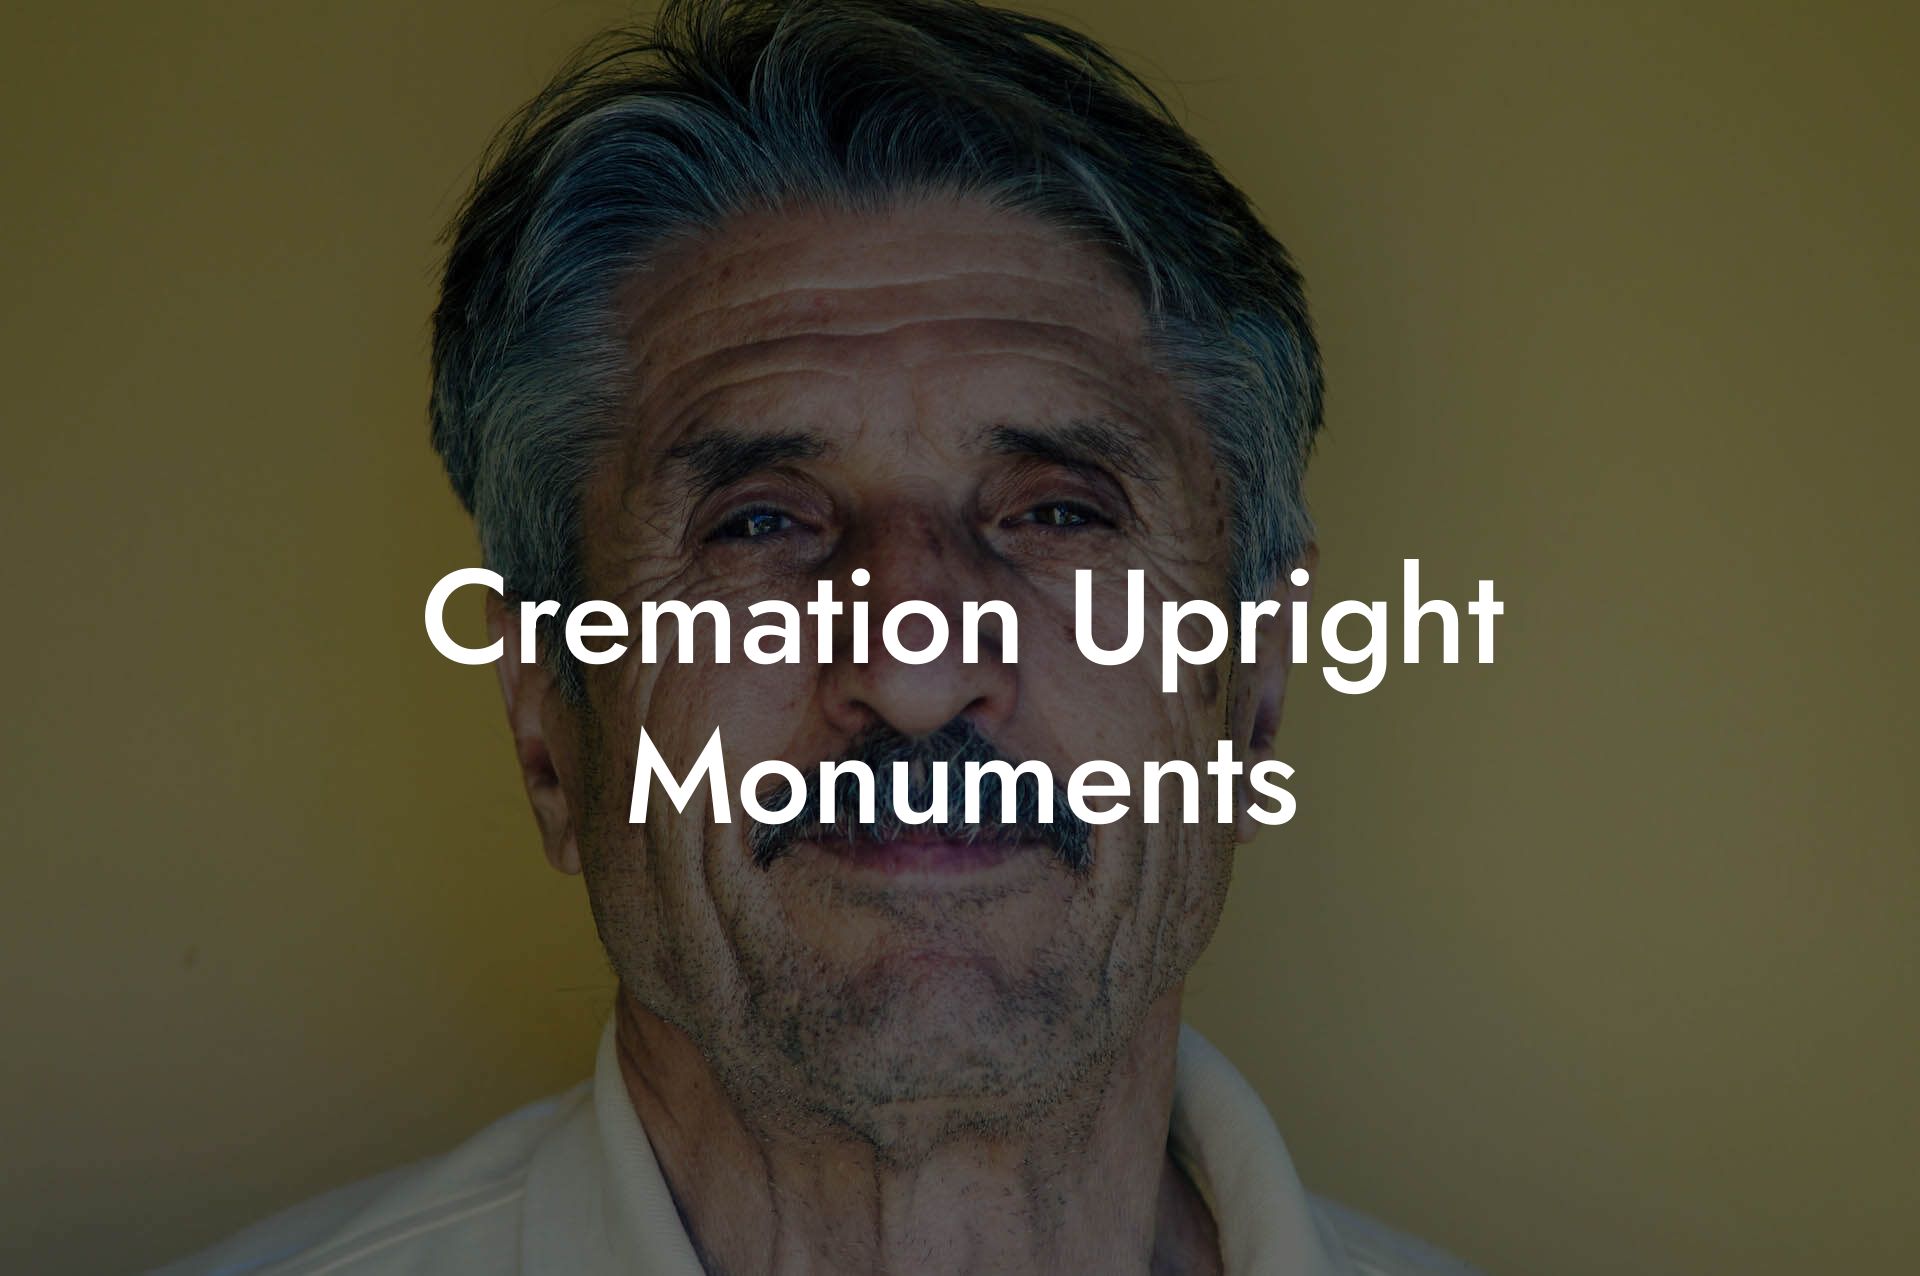 Cremation Upright Monuments